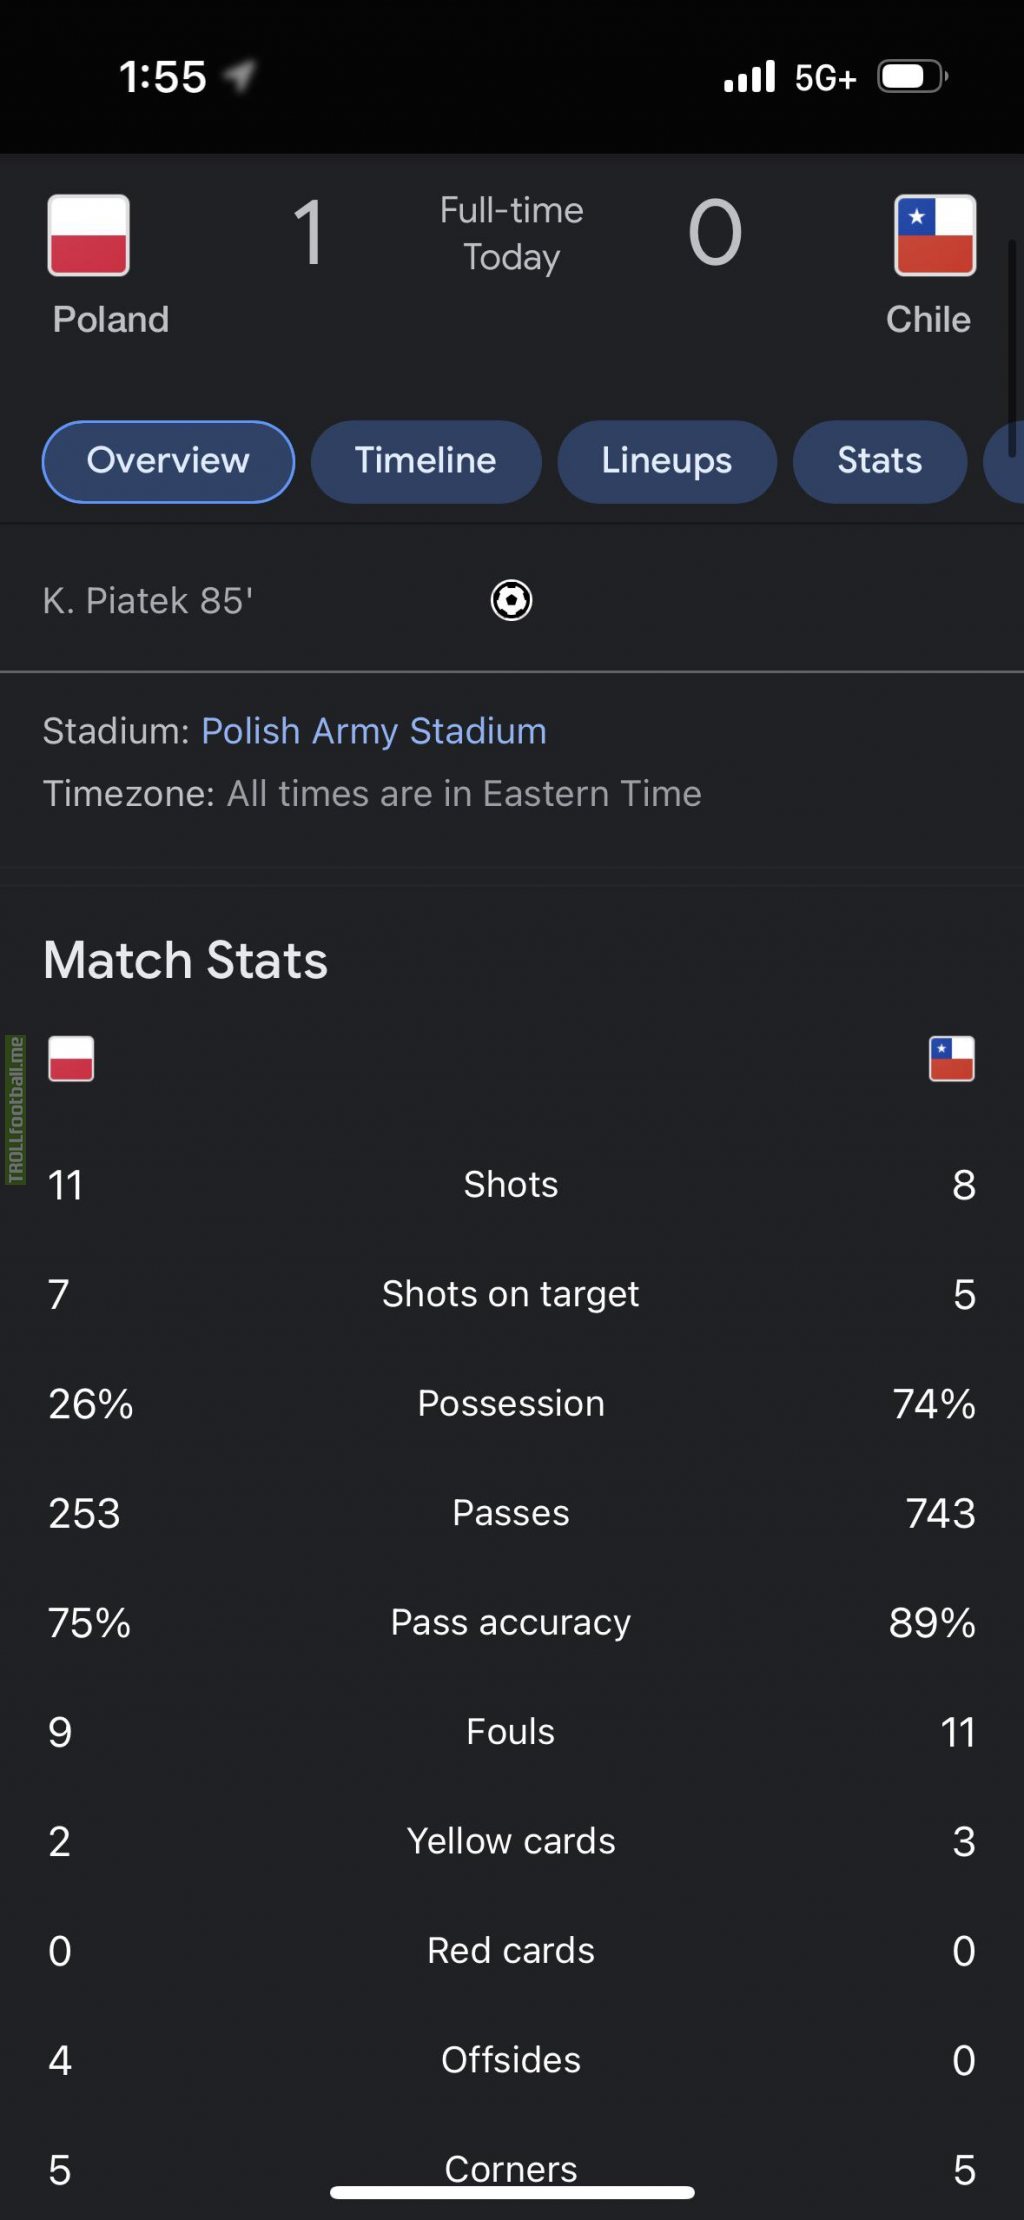 Poland beats Chile 1-0 in an international friendly before the World Cup